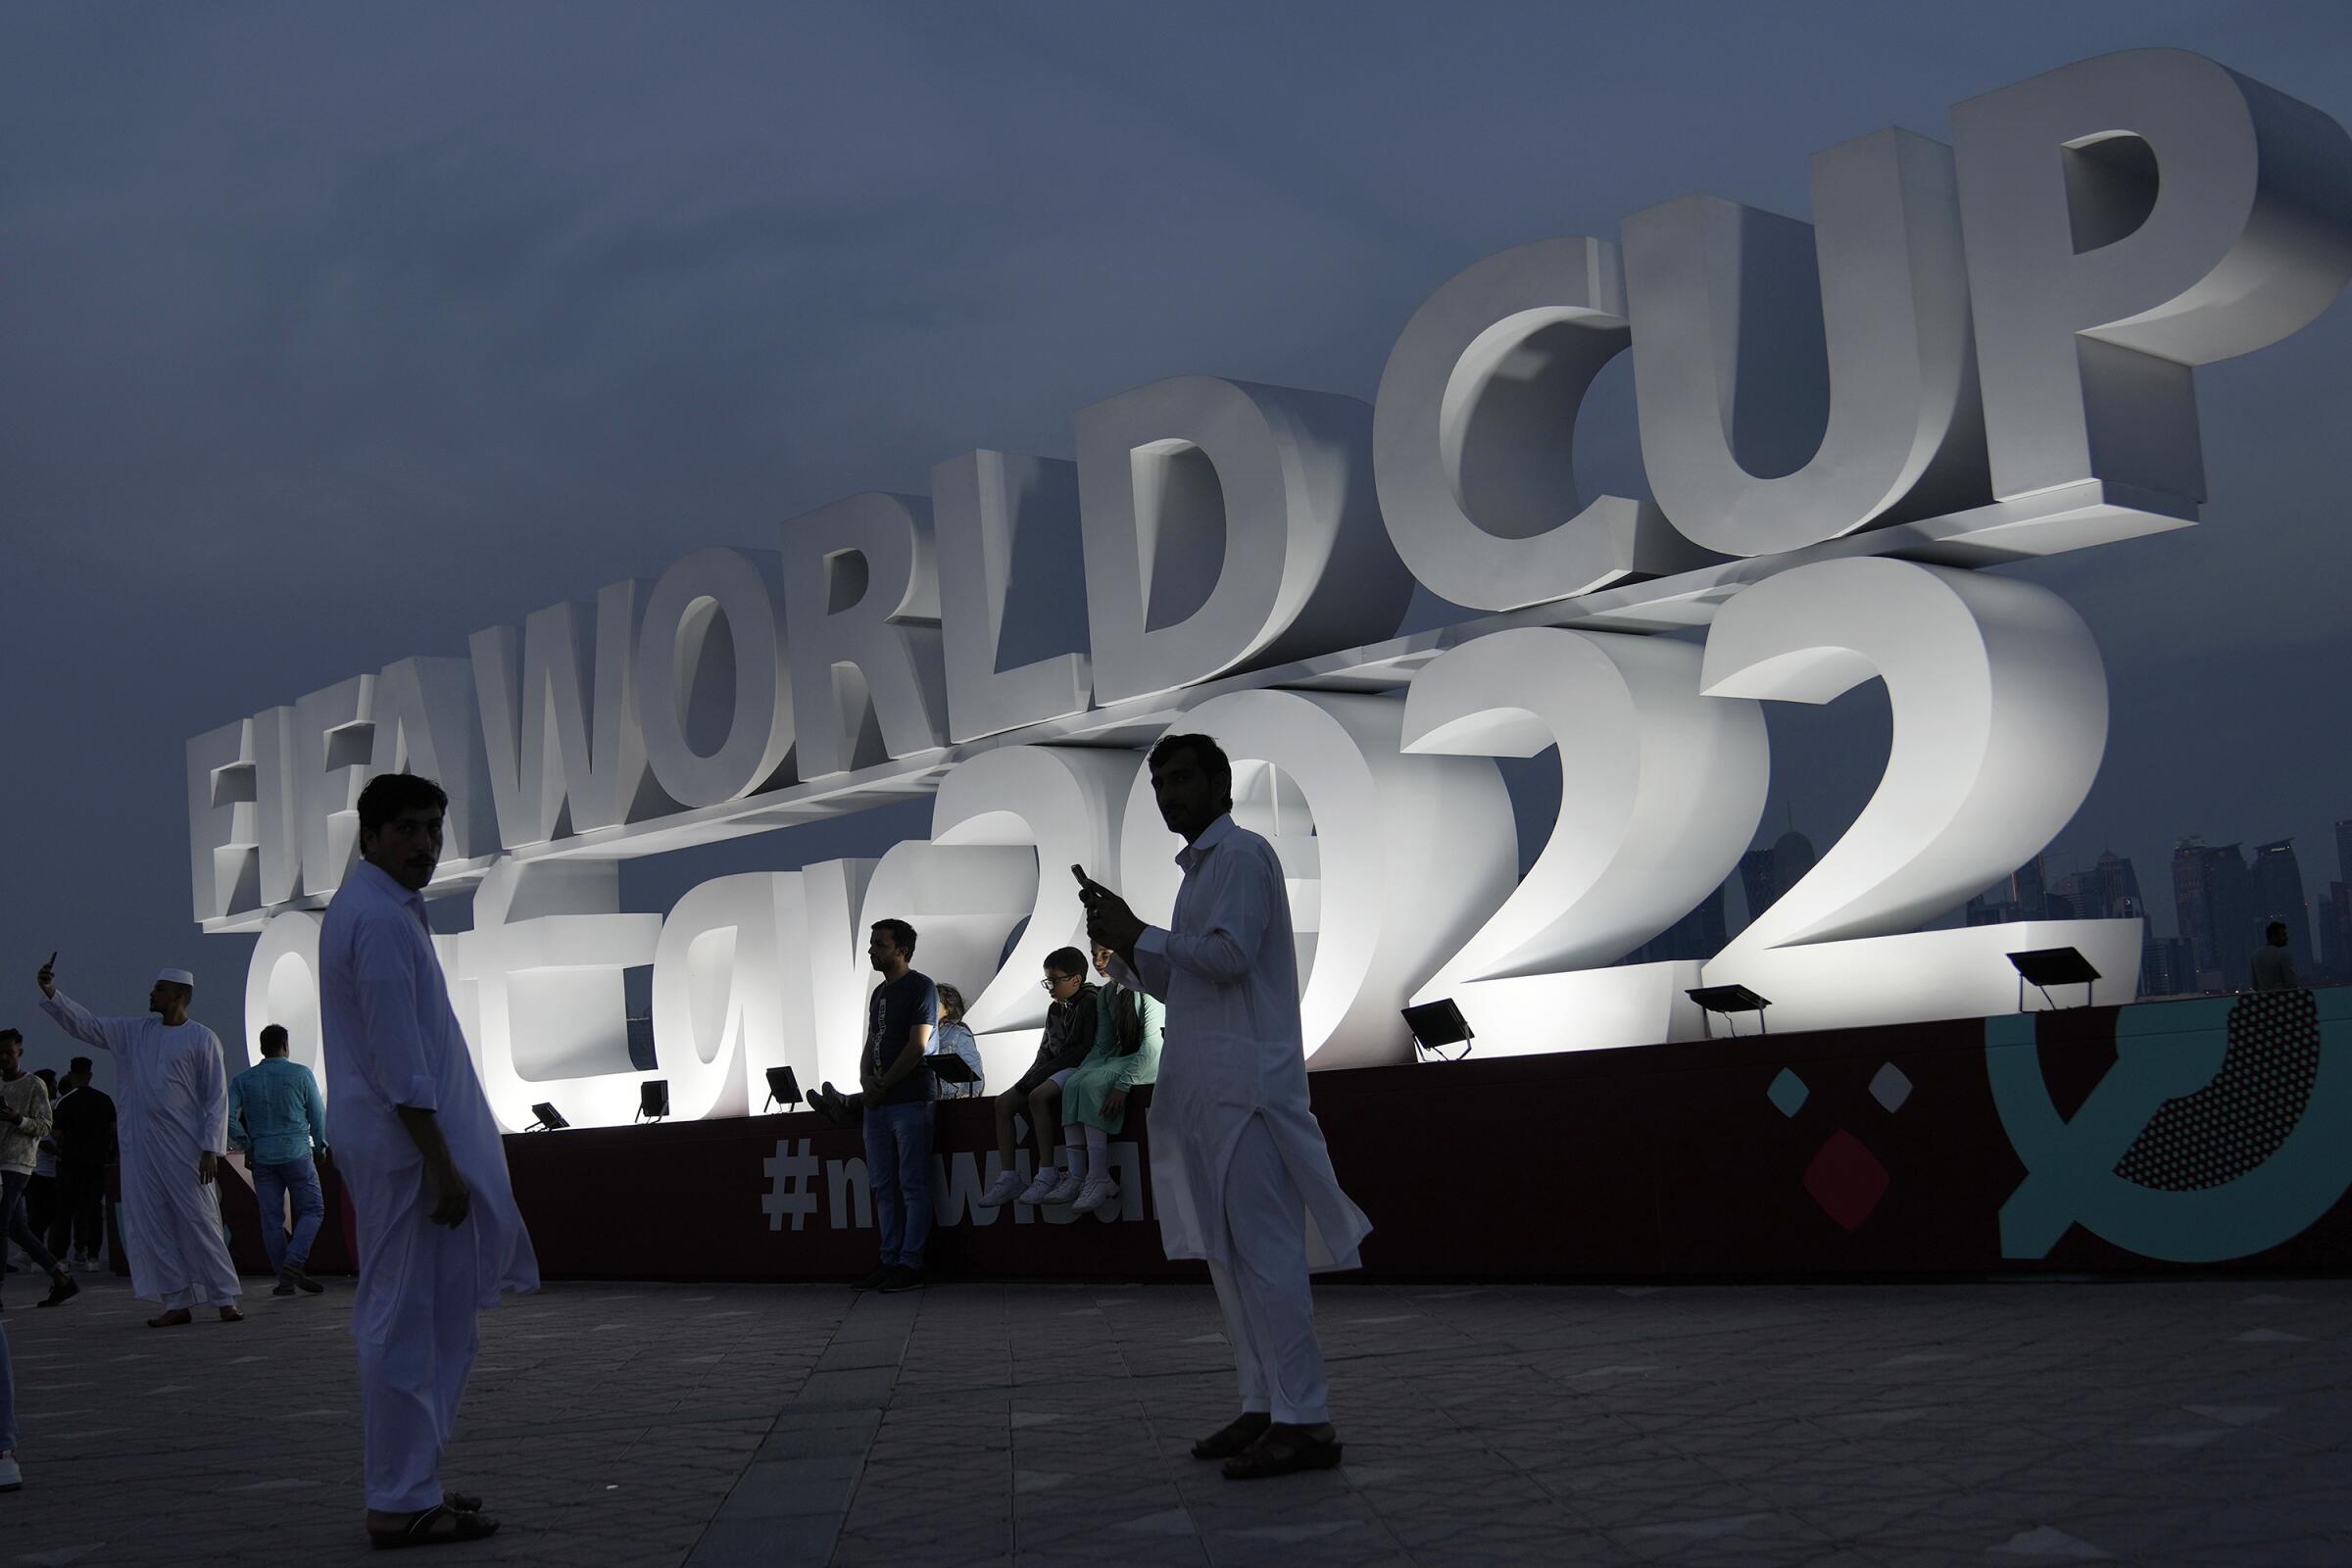 FIFA World Cup Qatar 2022: What legacy will it leave for Qatar